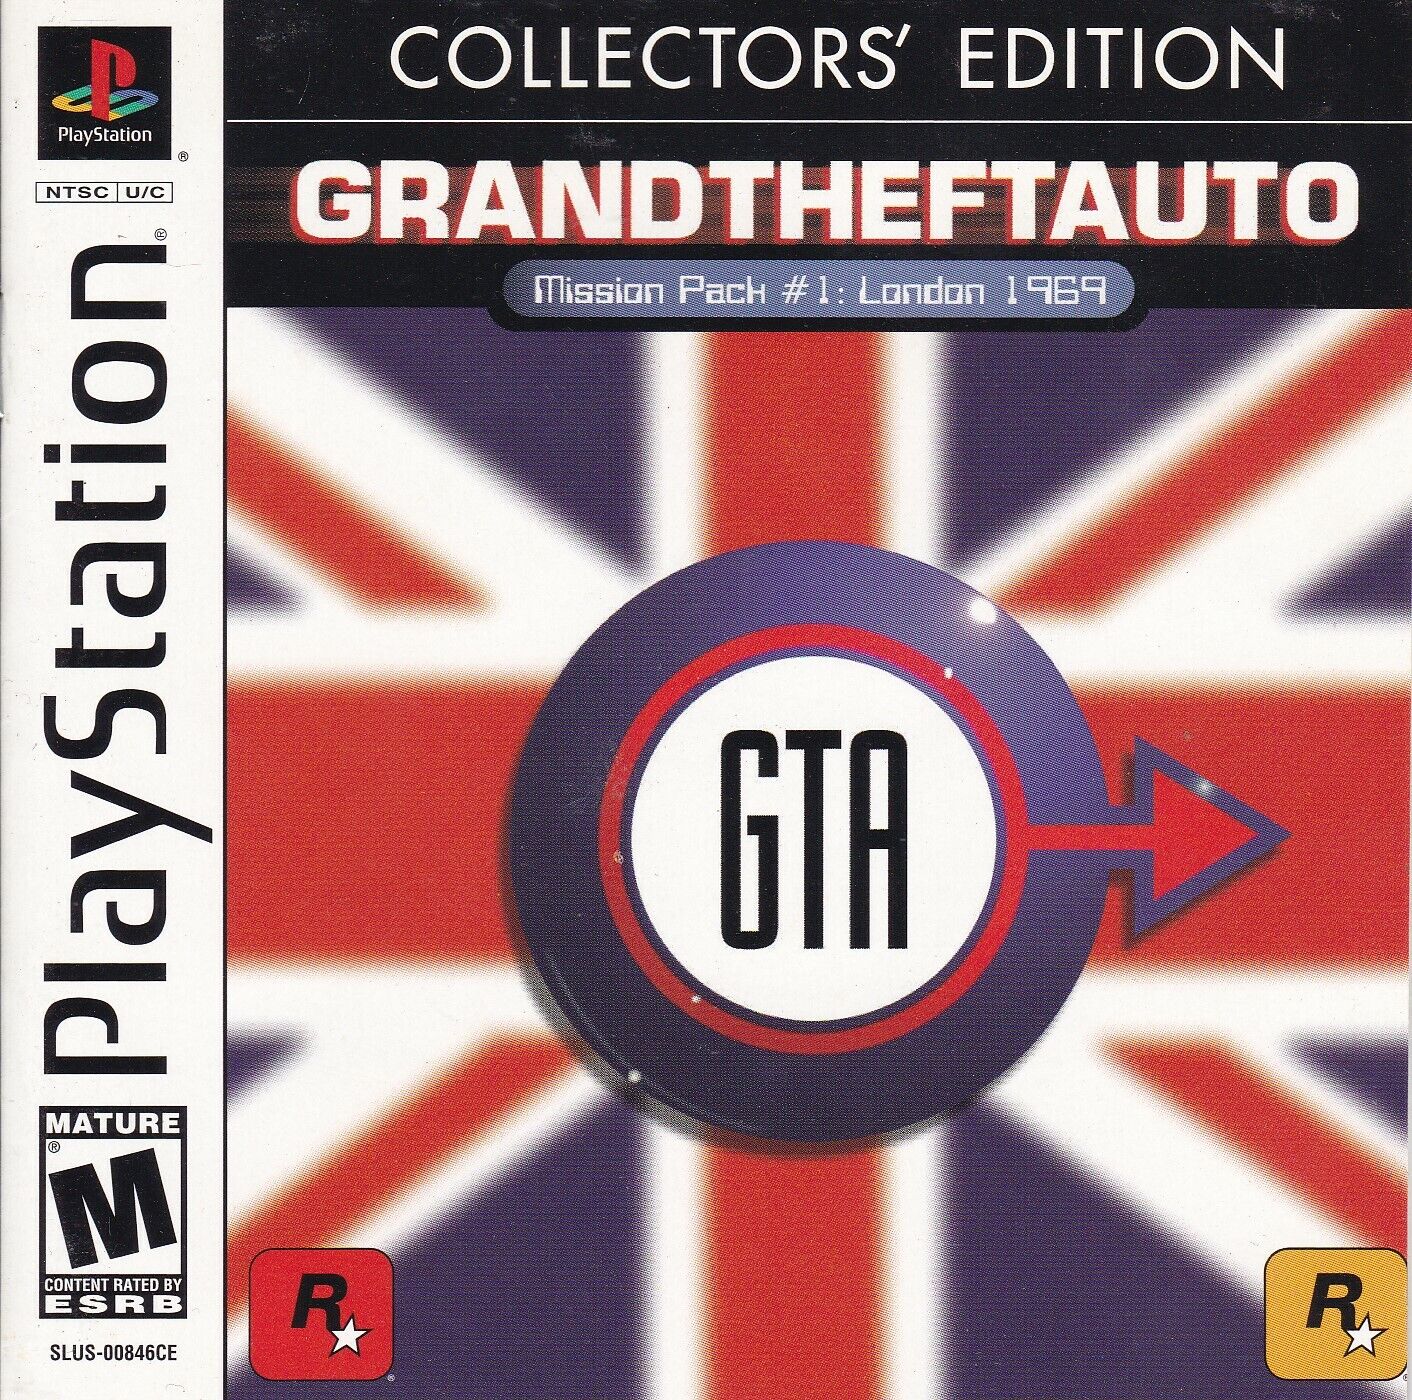 Grand Theft Auto GTA Mission Pack #1 London 1969 Collector's Edition - Sony PlayStation 1 (PS1)